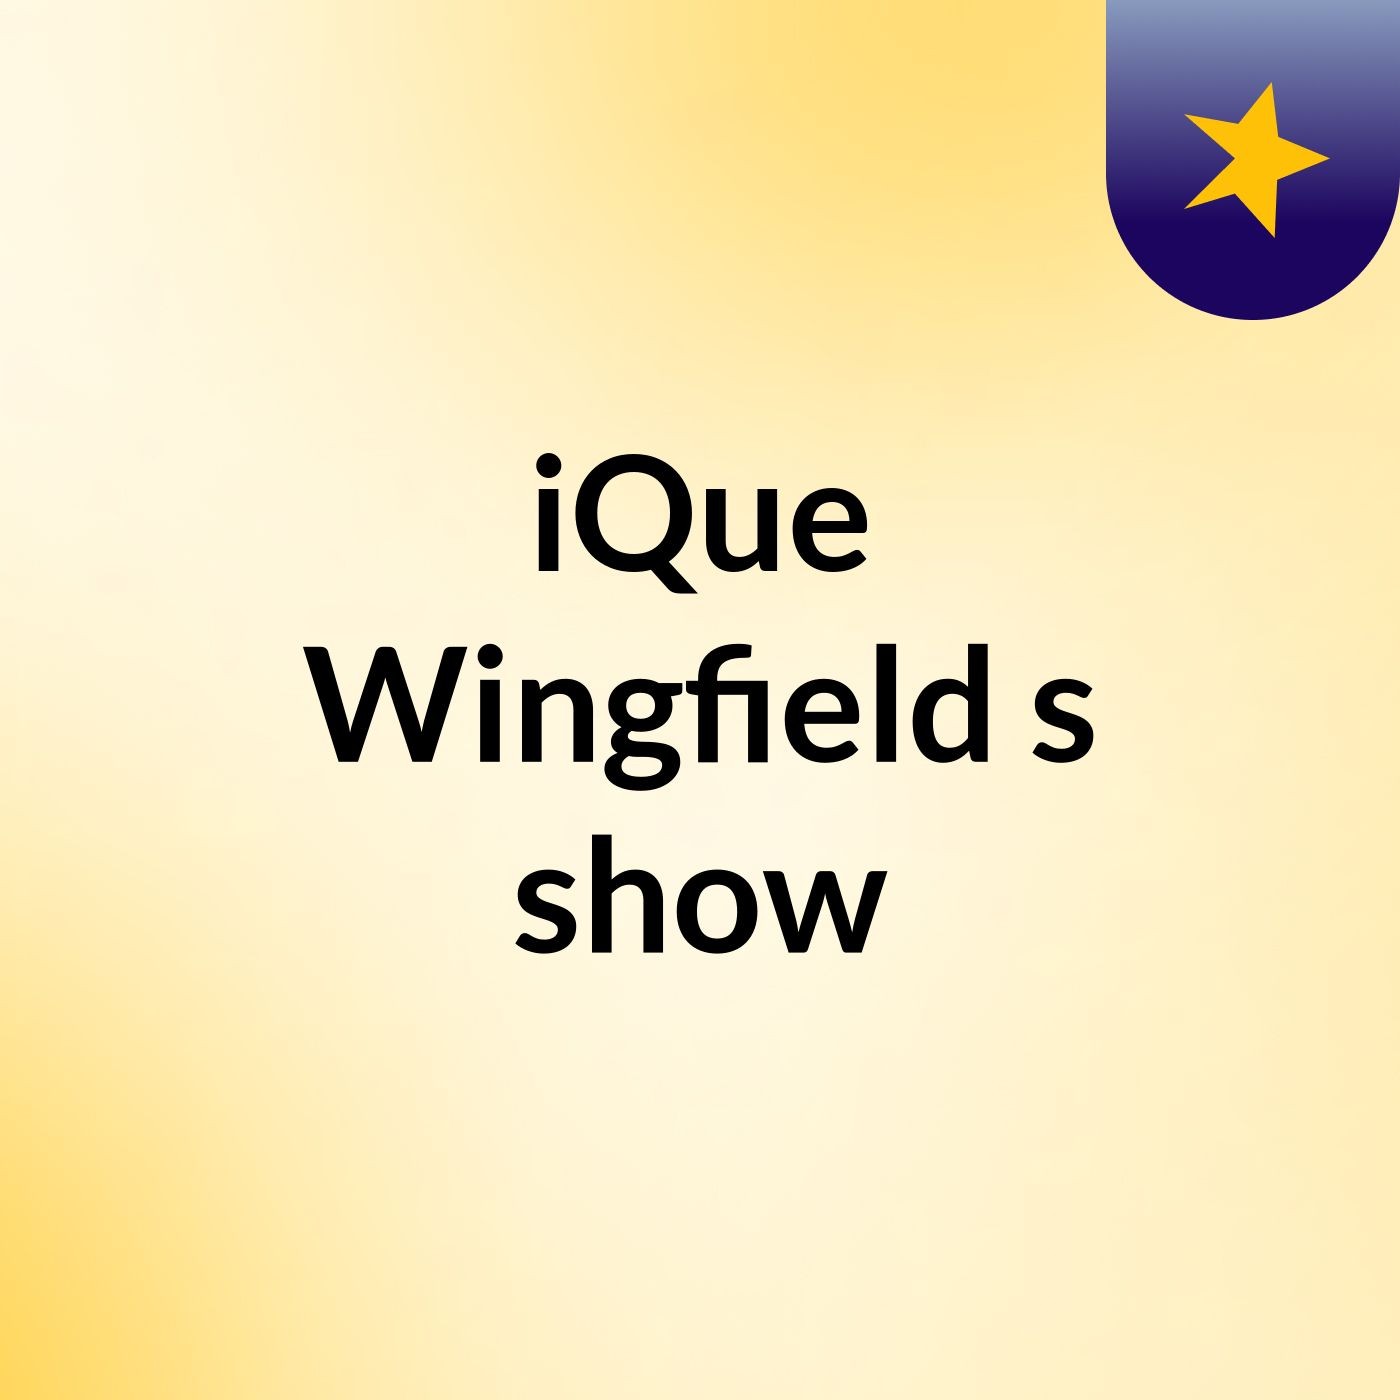 iQue Wingfield's show